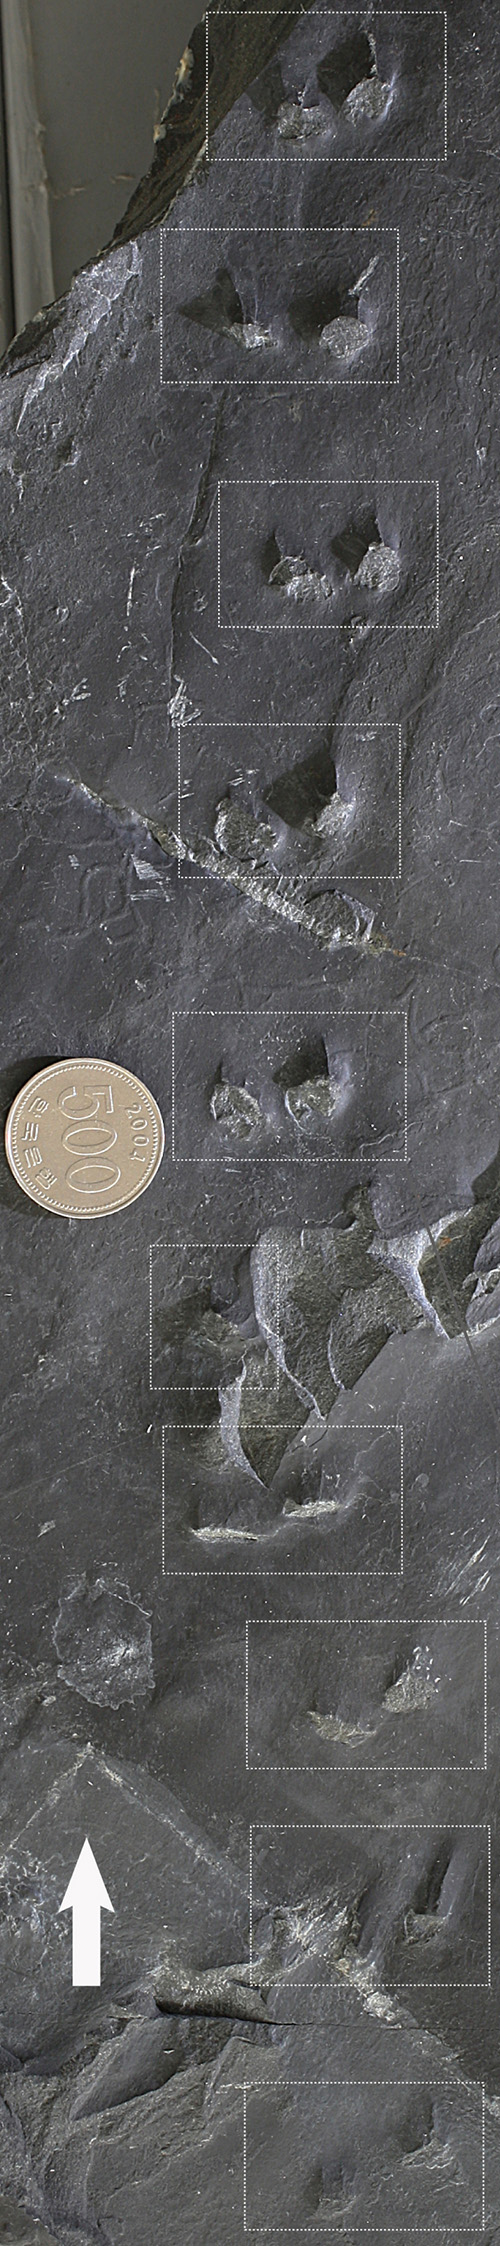 The footprints of a Cretaceous Period mammal are smaller than a KRW 500 coin, which has a diameter of 2.65 cm.